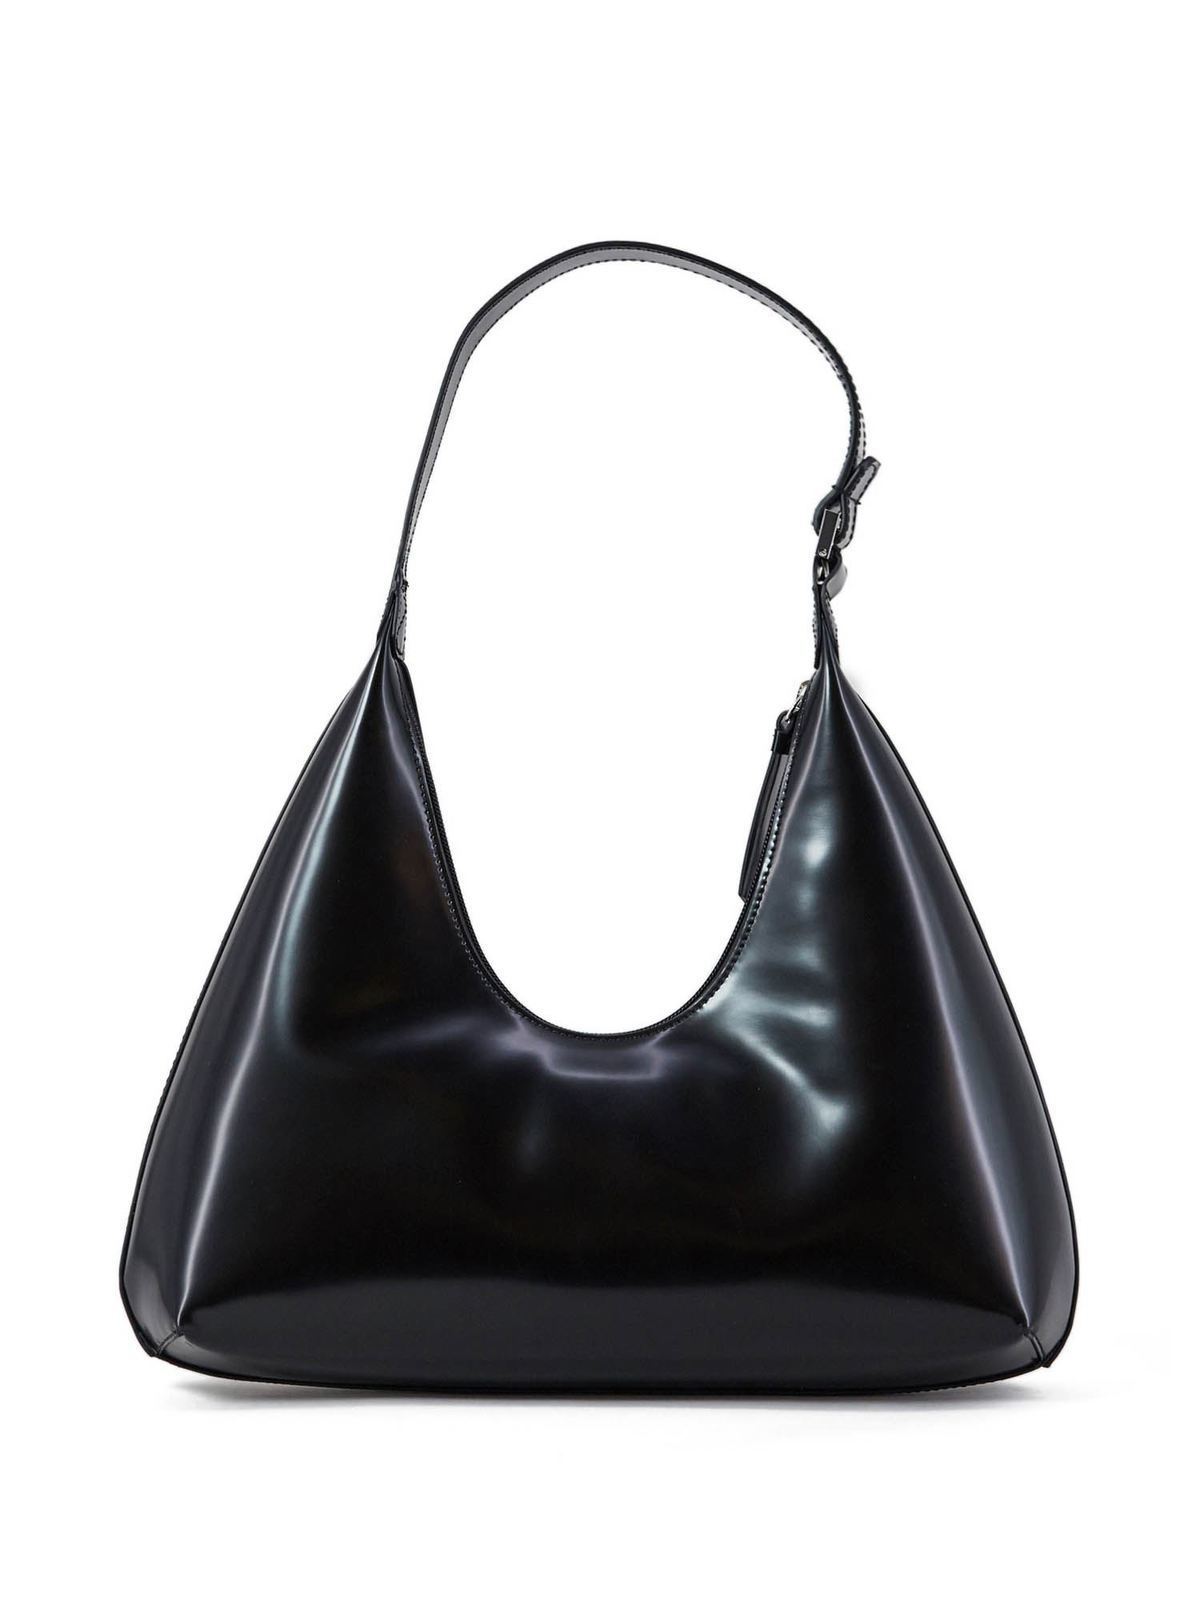 BY FAR Amber Semi-Patent Leather Shoulder Bag